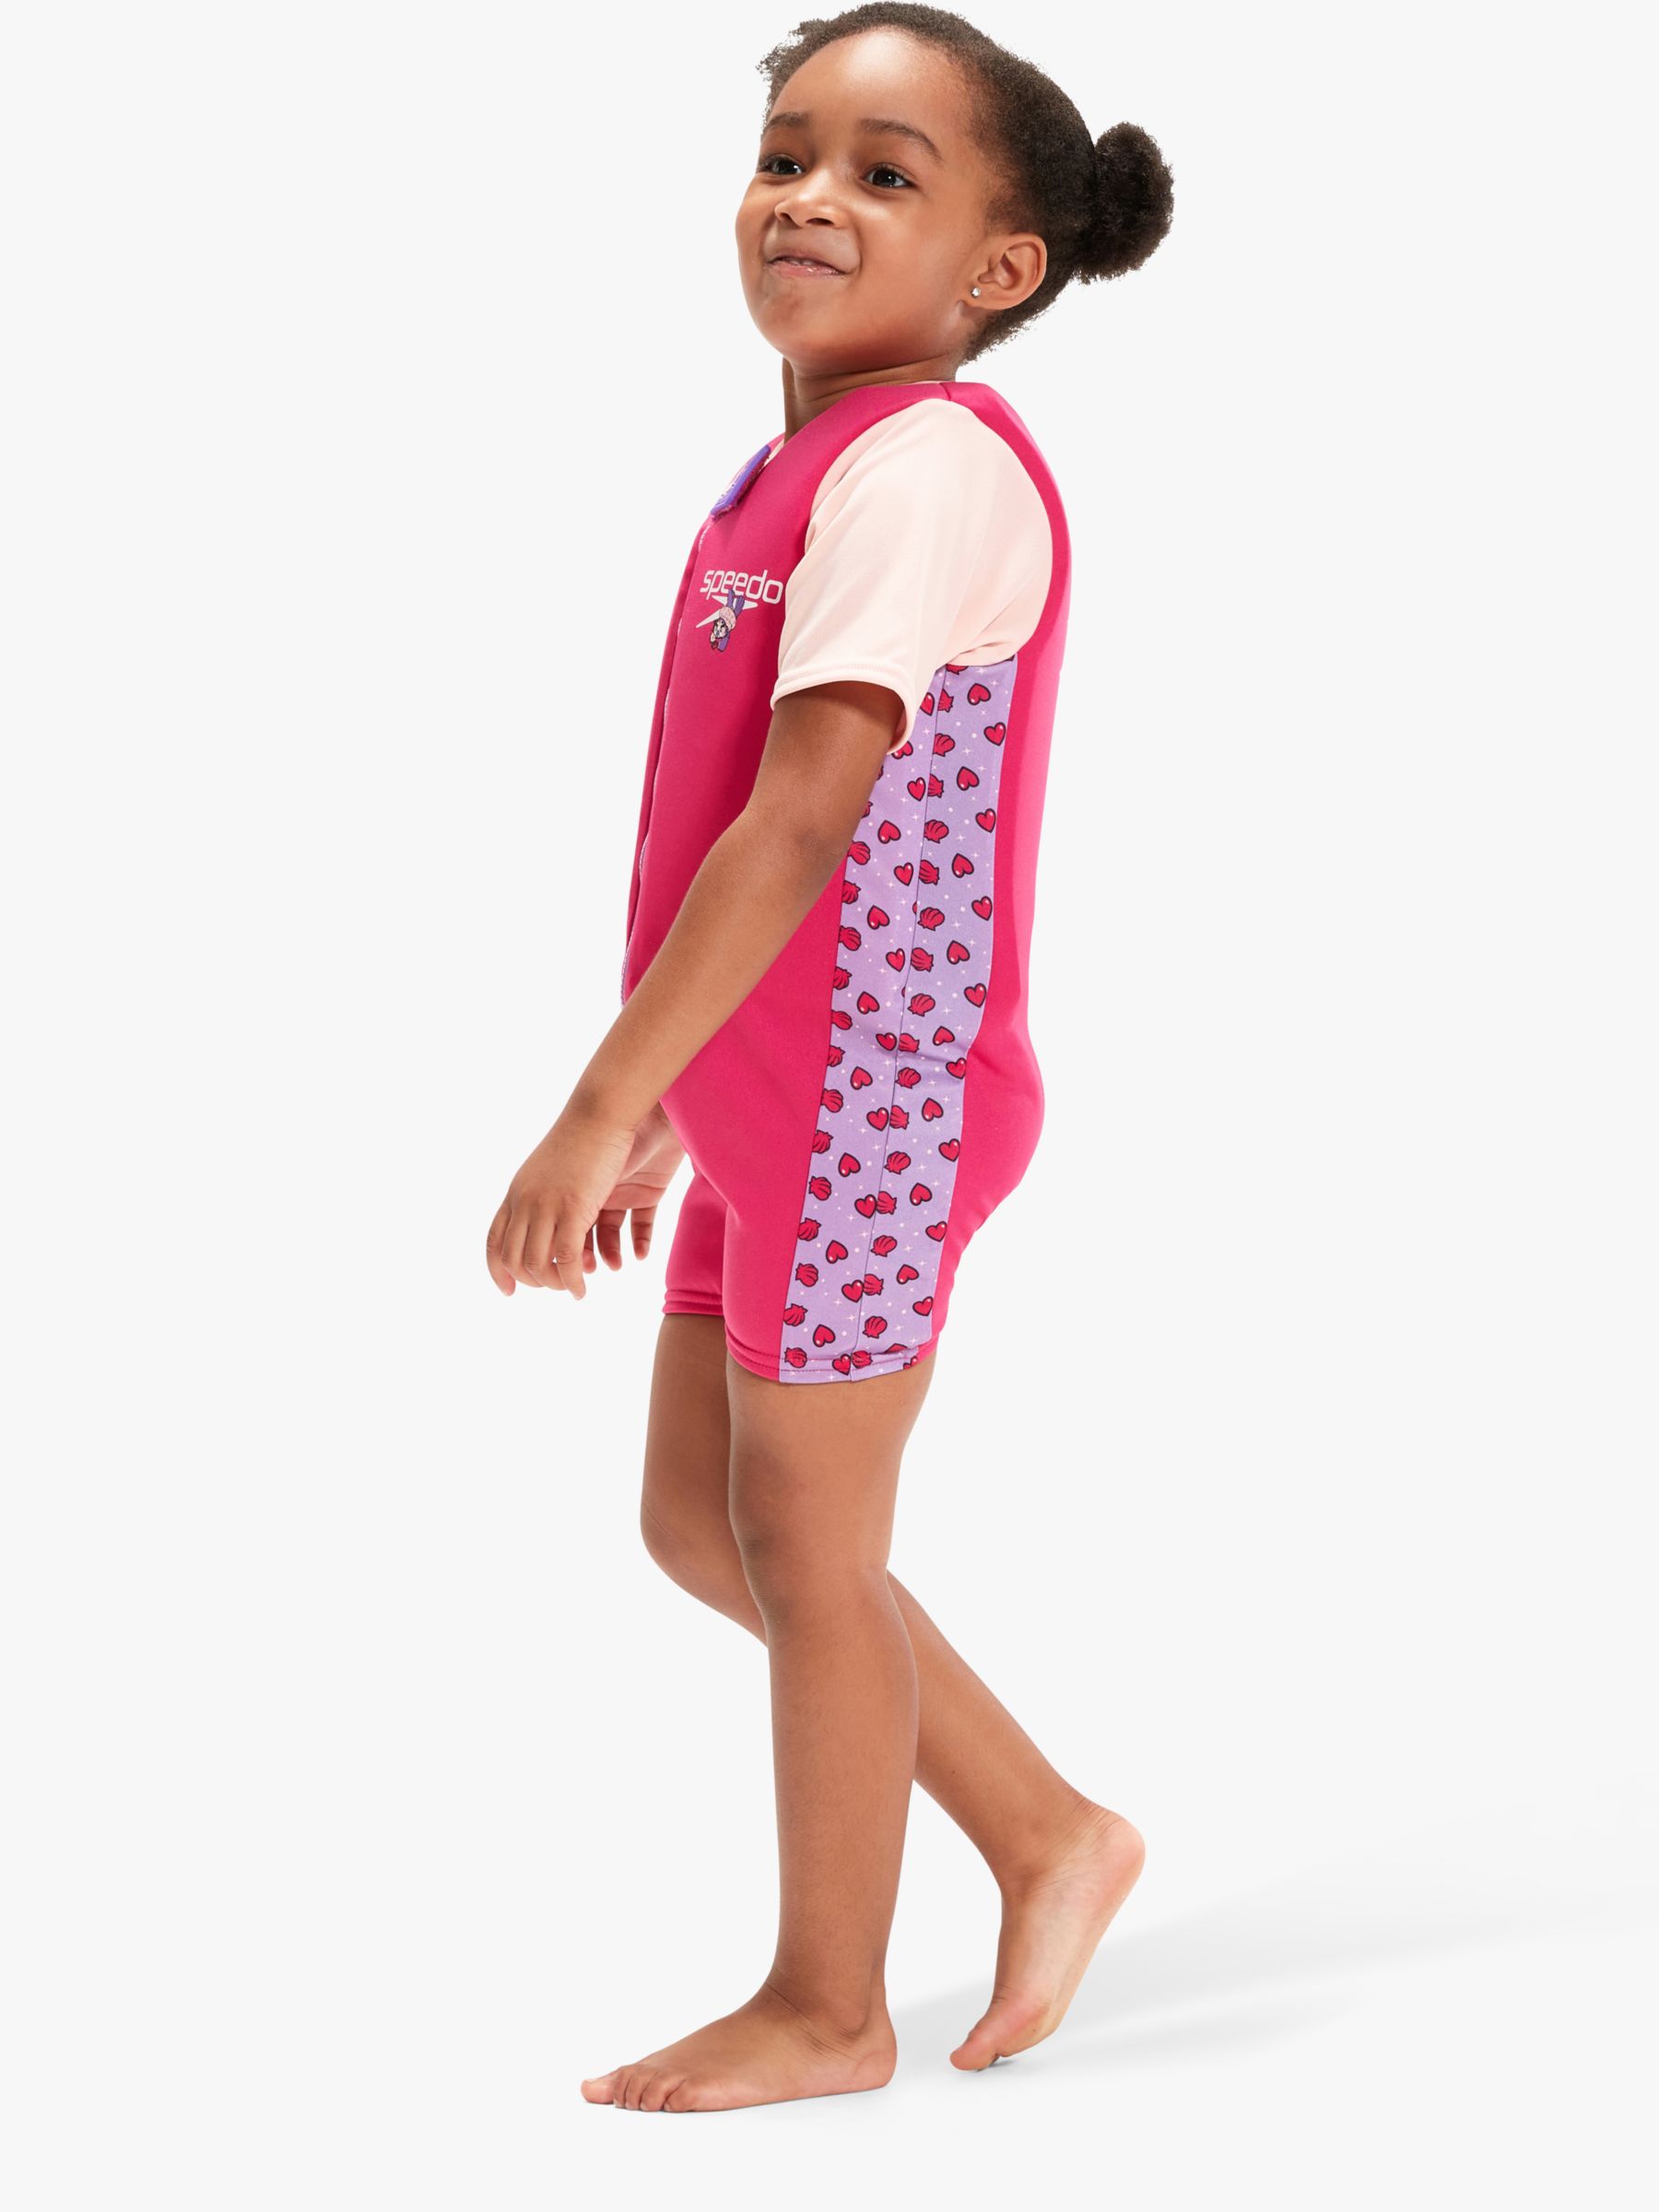 Speedo Baby Seal Floatsuit, Miami Lilac/Cherry, 2-3 years